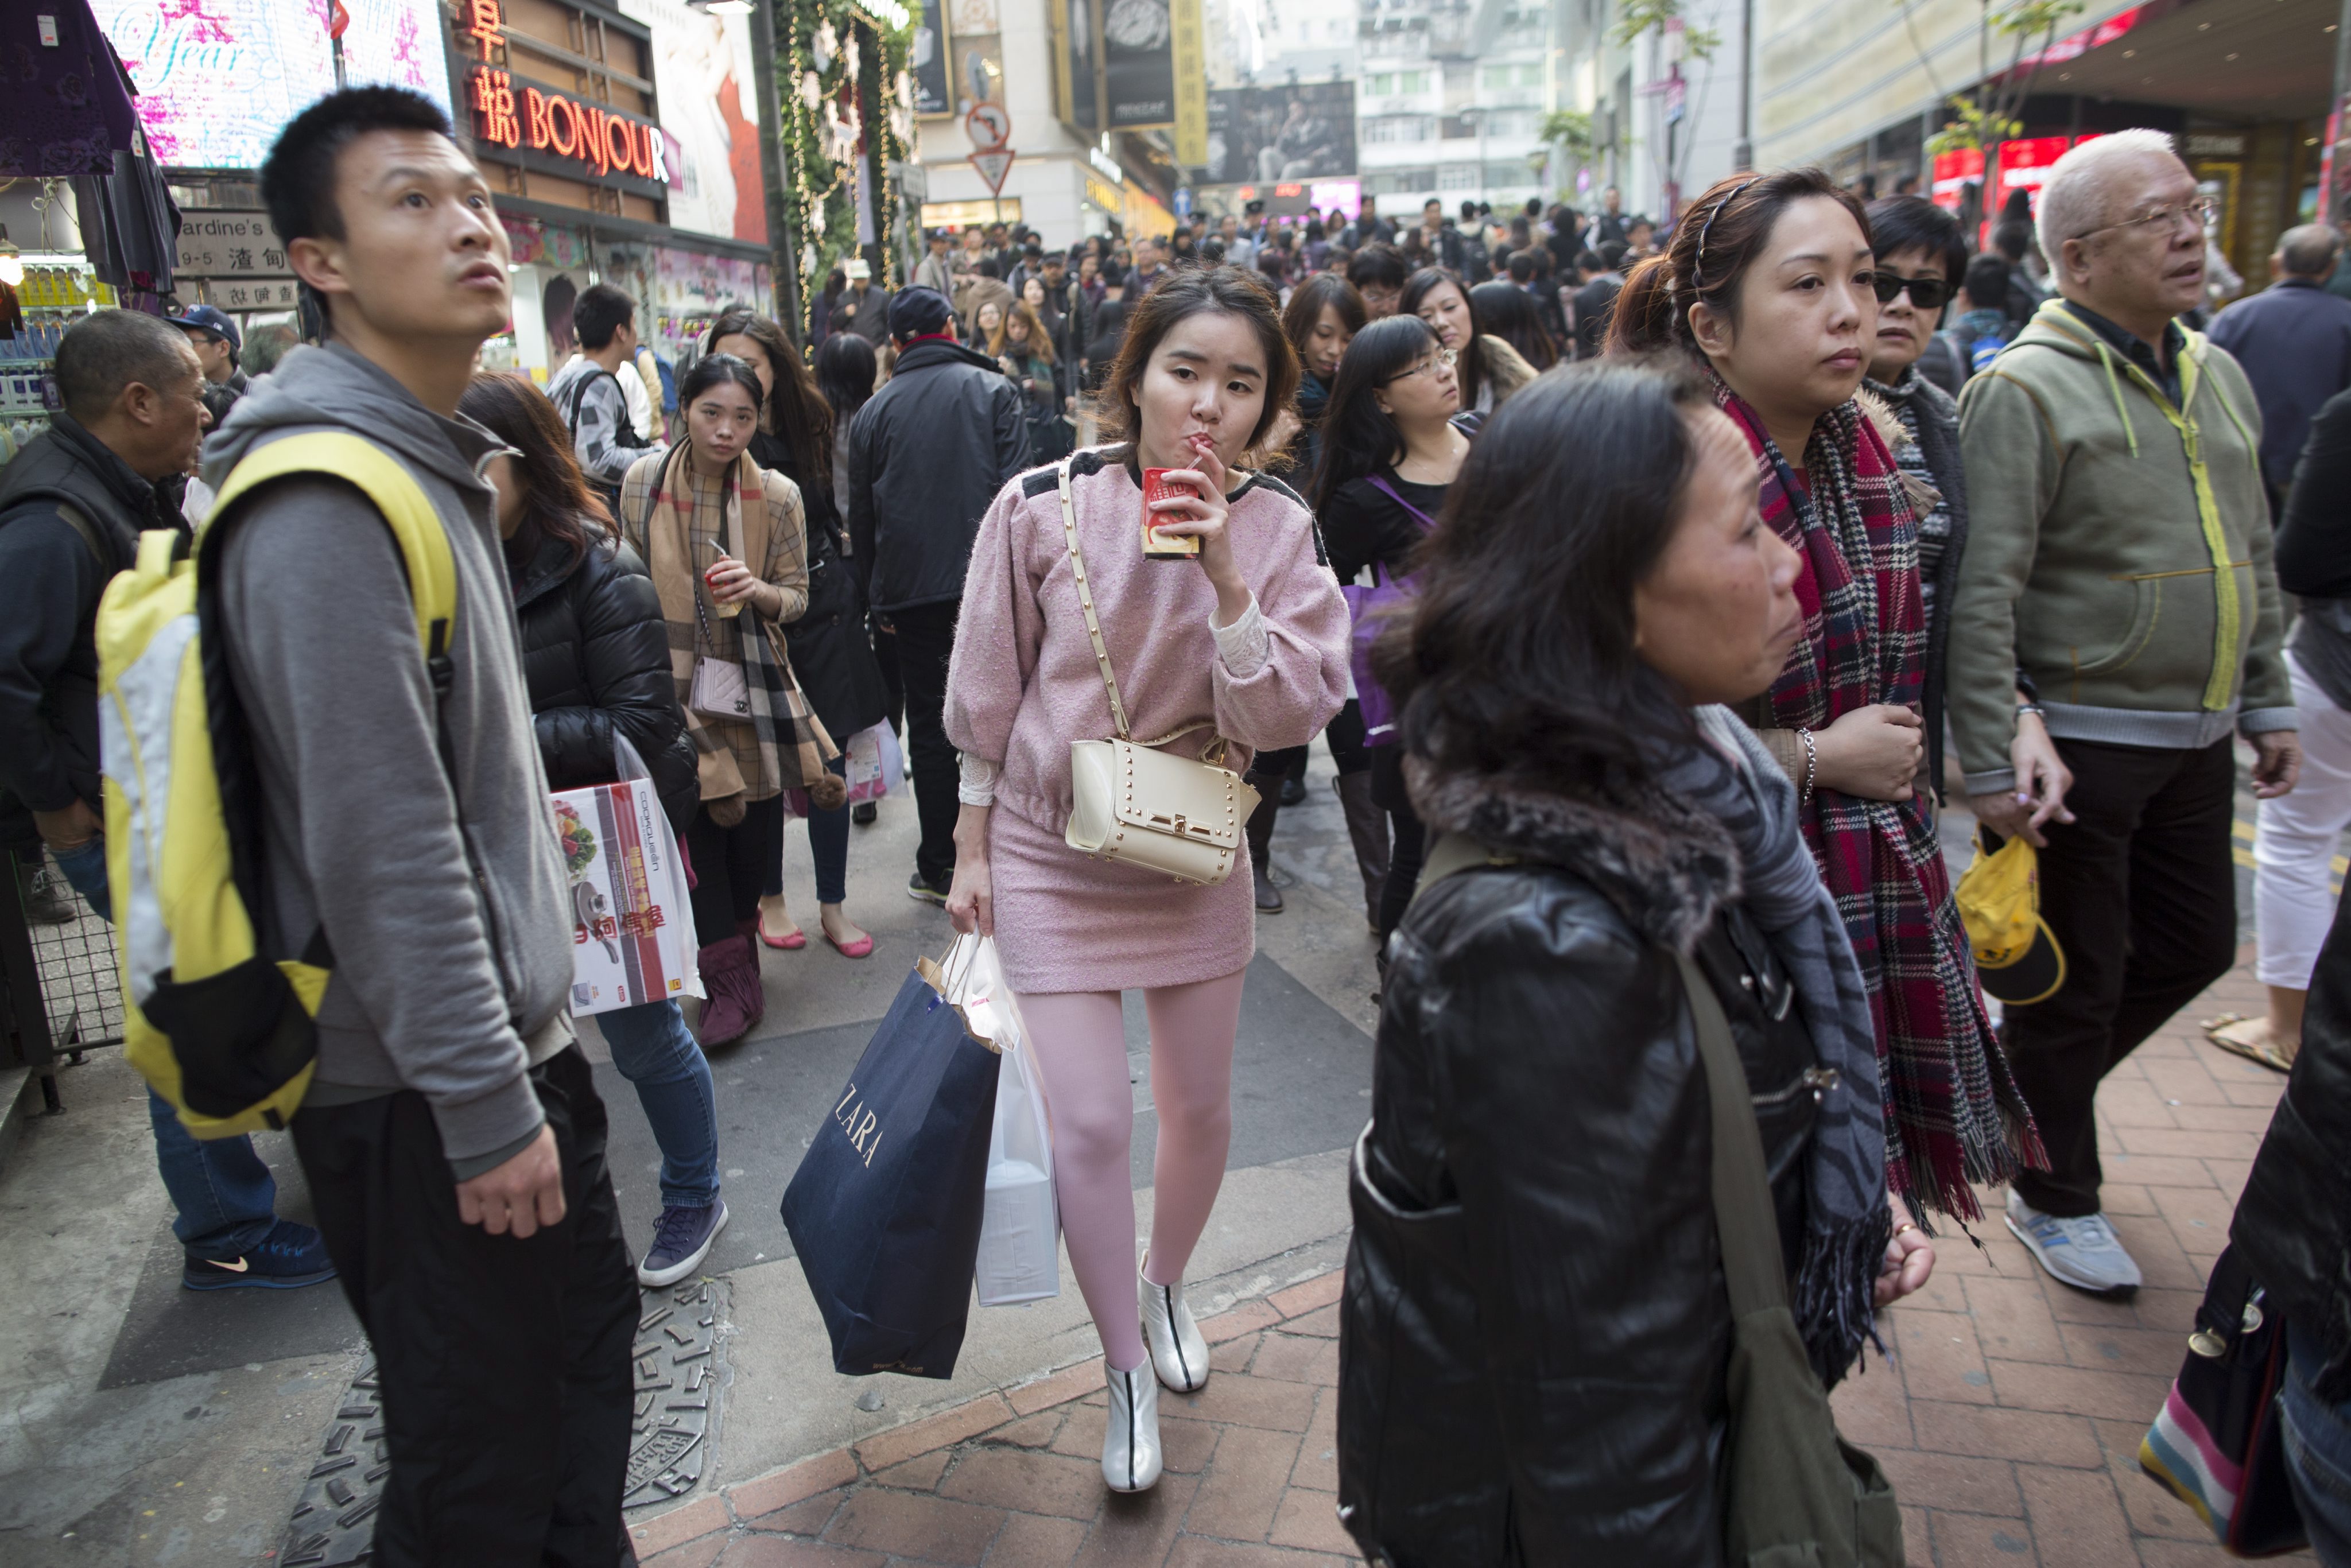 Hong Kong has thrived as a major trading entrepot for decades, a strength that now supports its booming retail sector. Photo: EPA